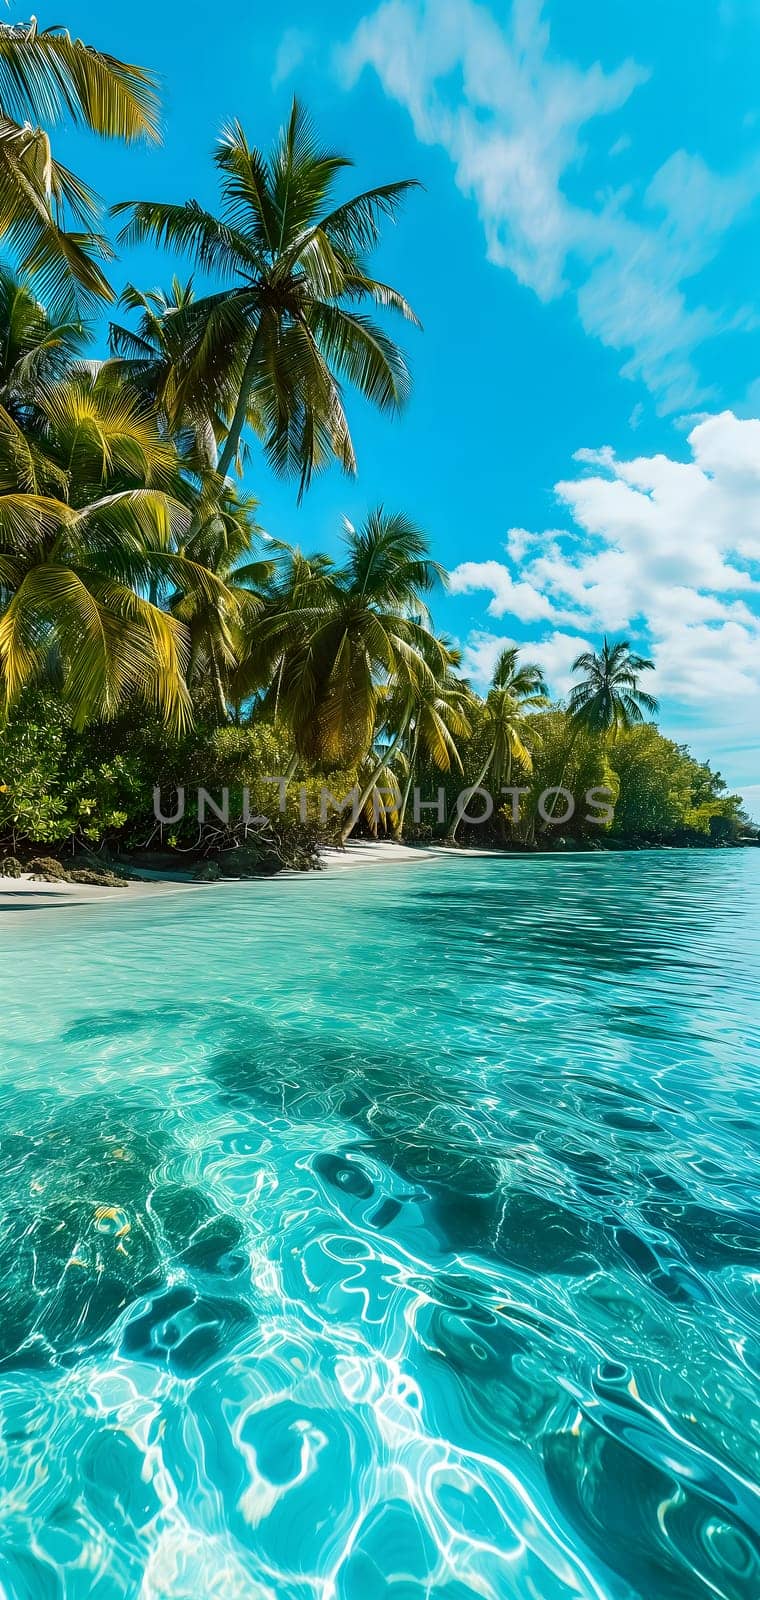 tropical beach view at sunny day with white sand, turquoise water and palm tree, neural network generated image by z1b